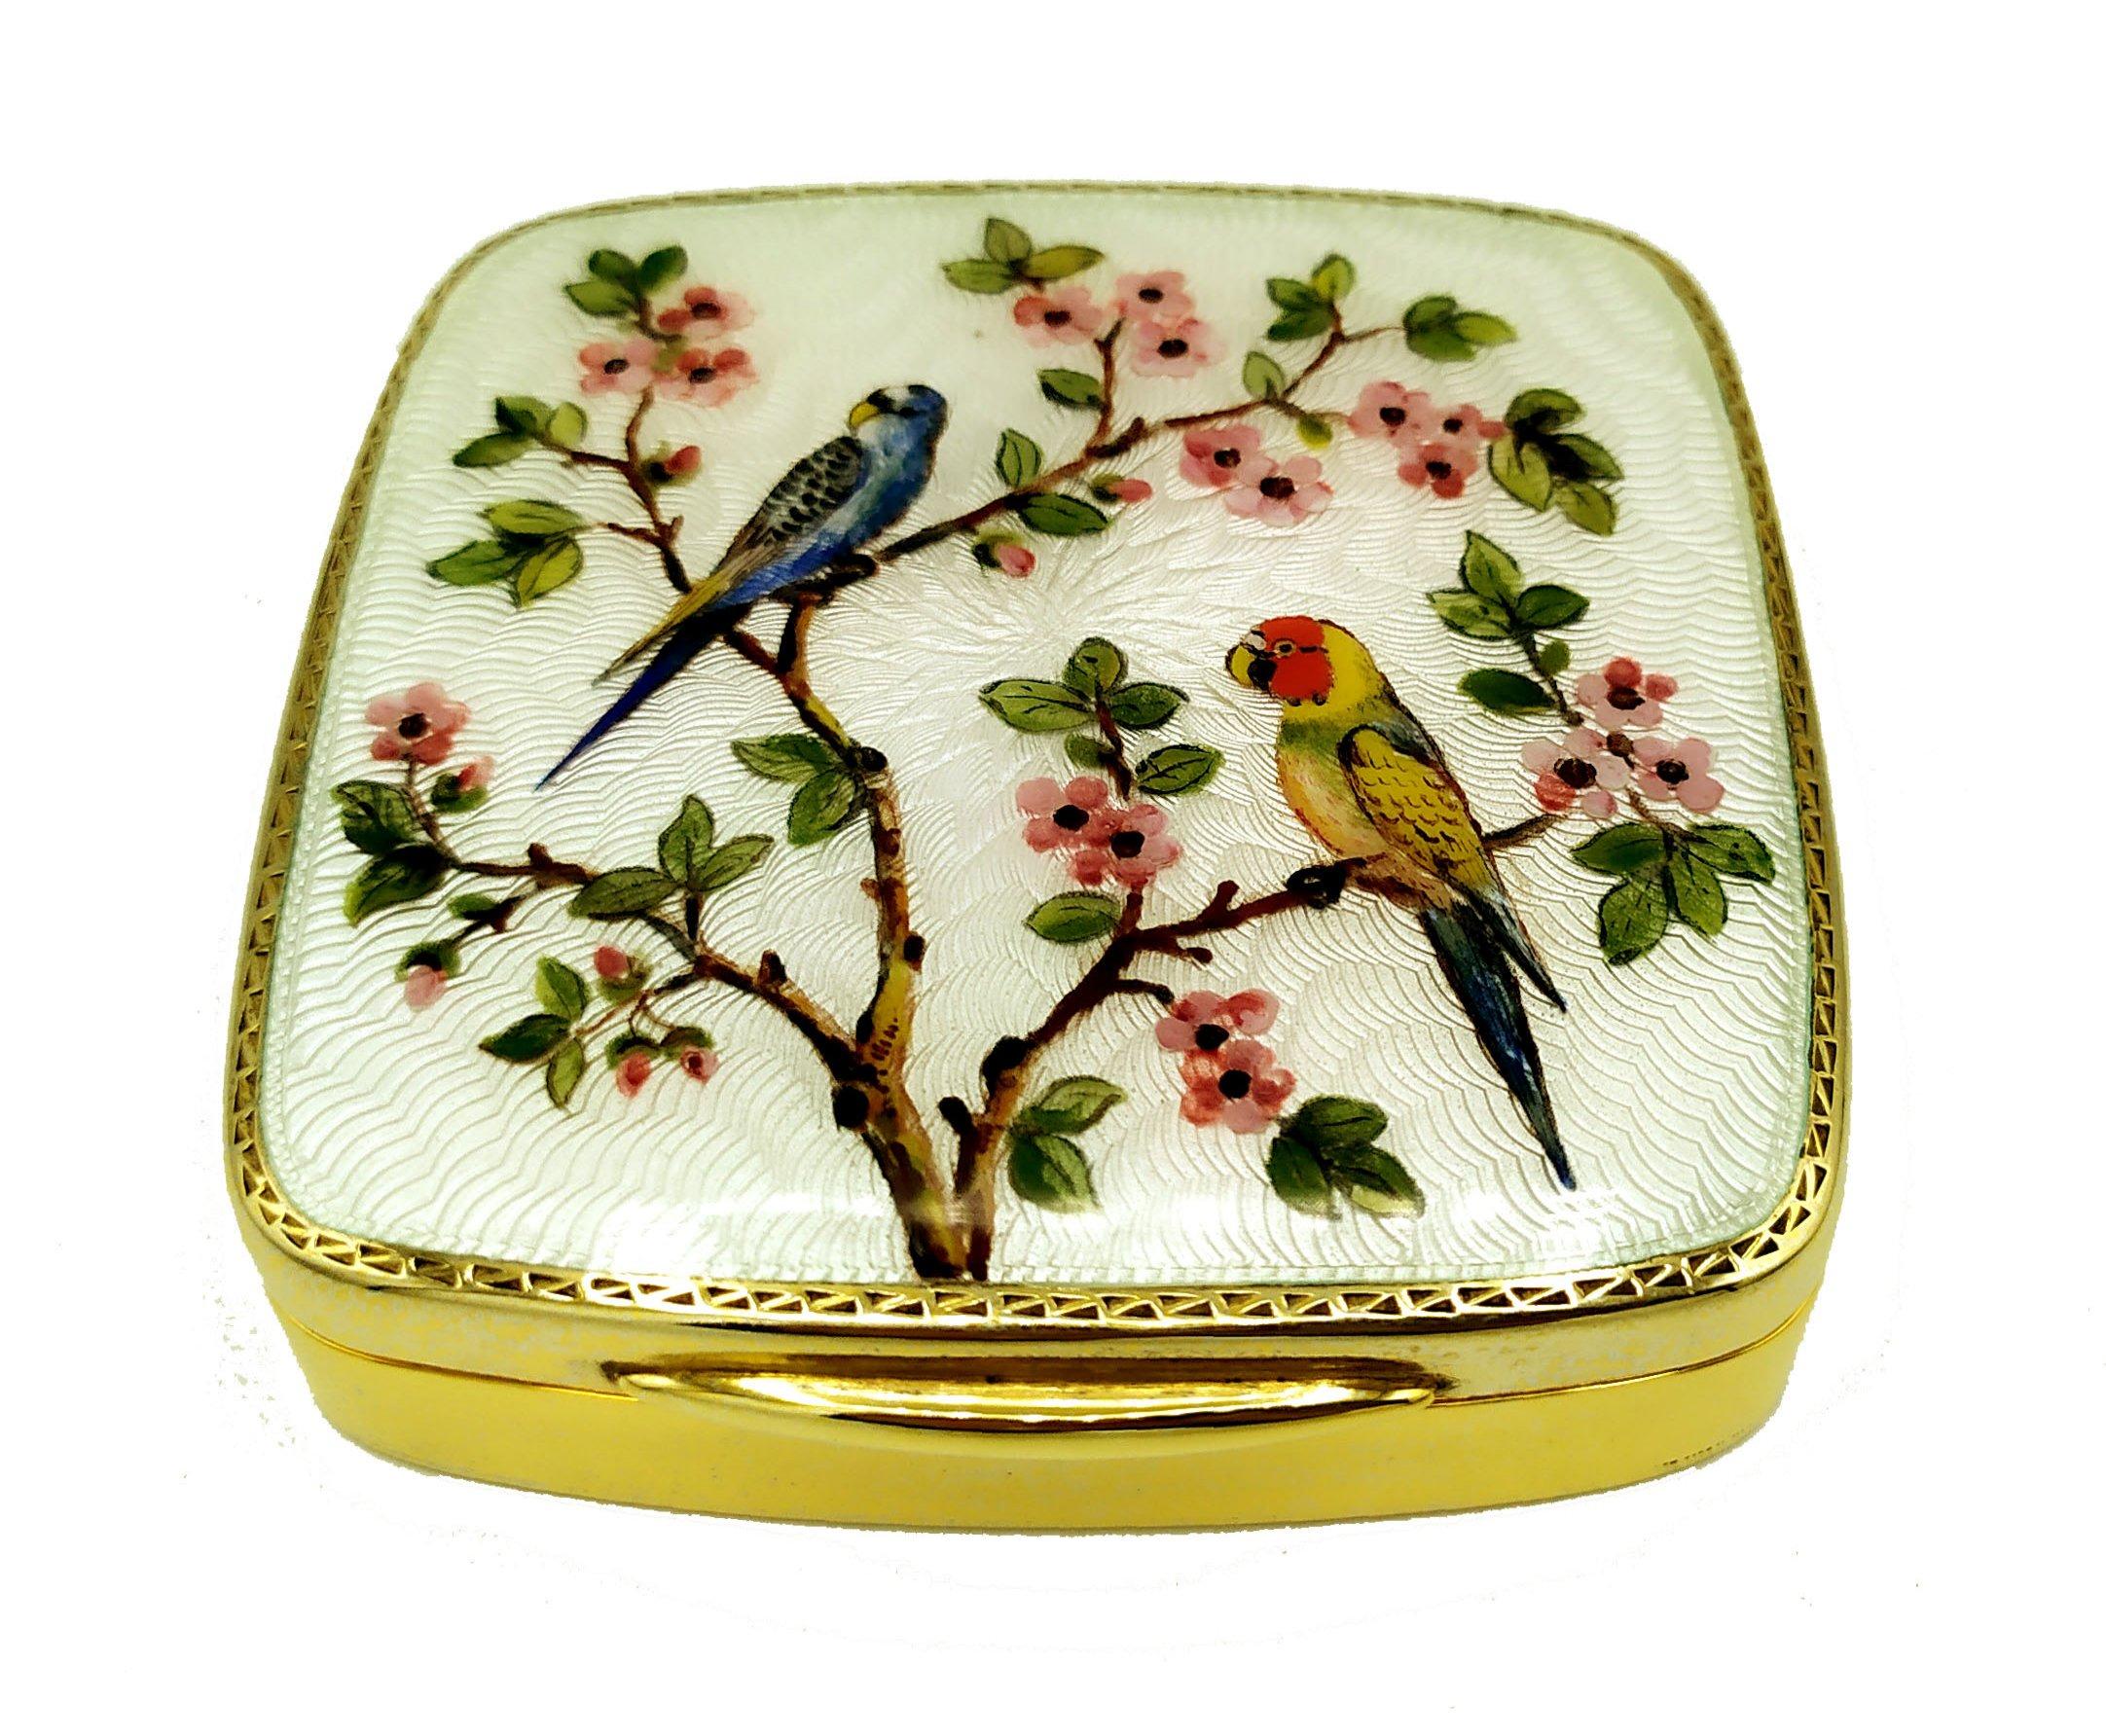 Square snuff box with rounded sides in 925/1000 sterling silver gold plated with translucent fired enamel on guillochè and hand painted miniature parrotlets on flowering branches. Art Nouveau style early 1900s. Measure cm. 7.5 x 7.5 x 1.8. Weight